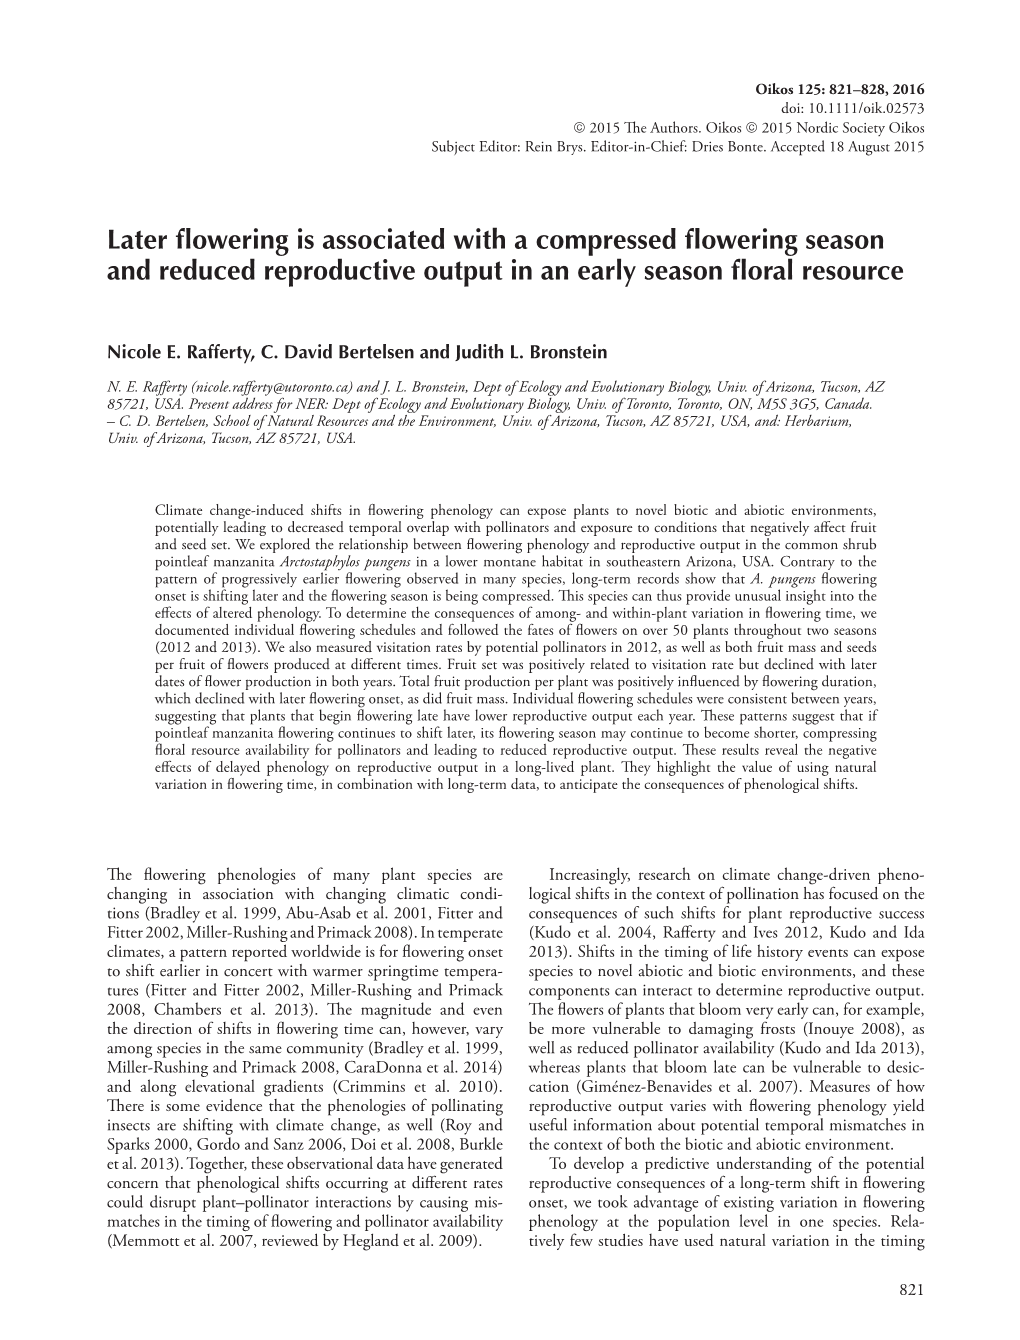 Later Flowering Is Associated with a Compressed Flowering Season and Reduced Reproductive Output in an Early Season Floral Resource